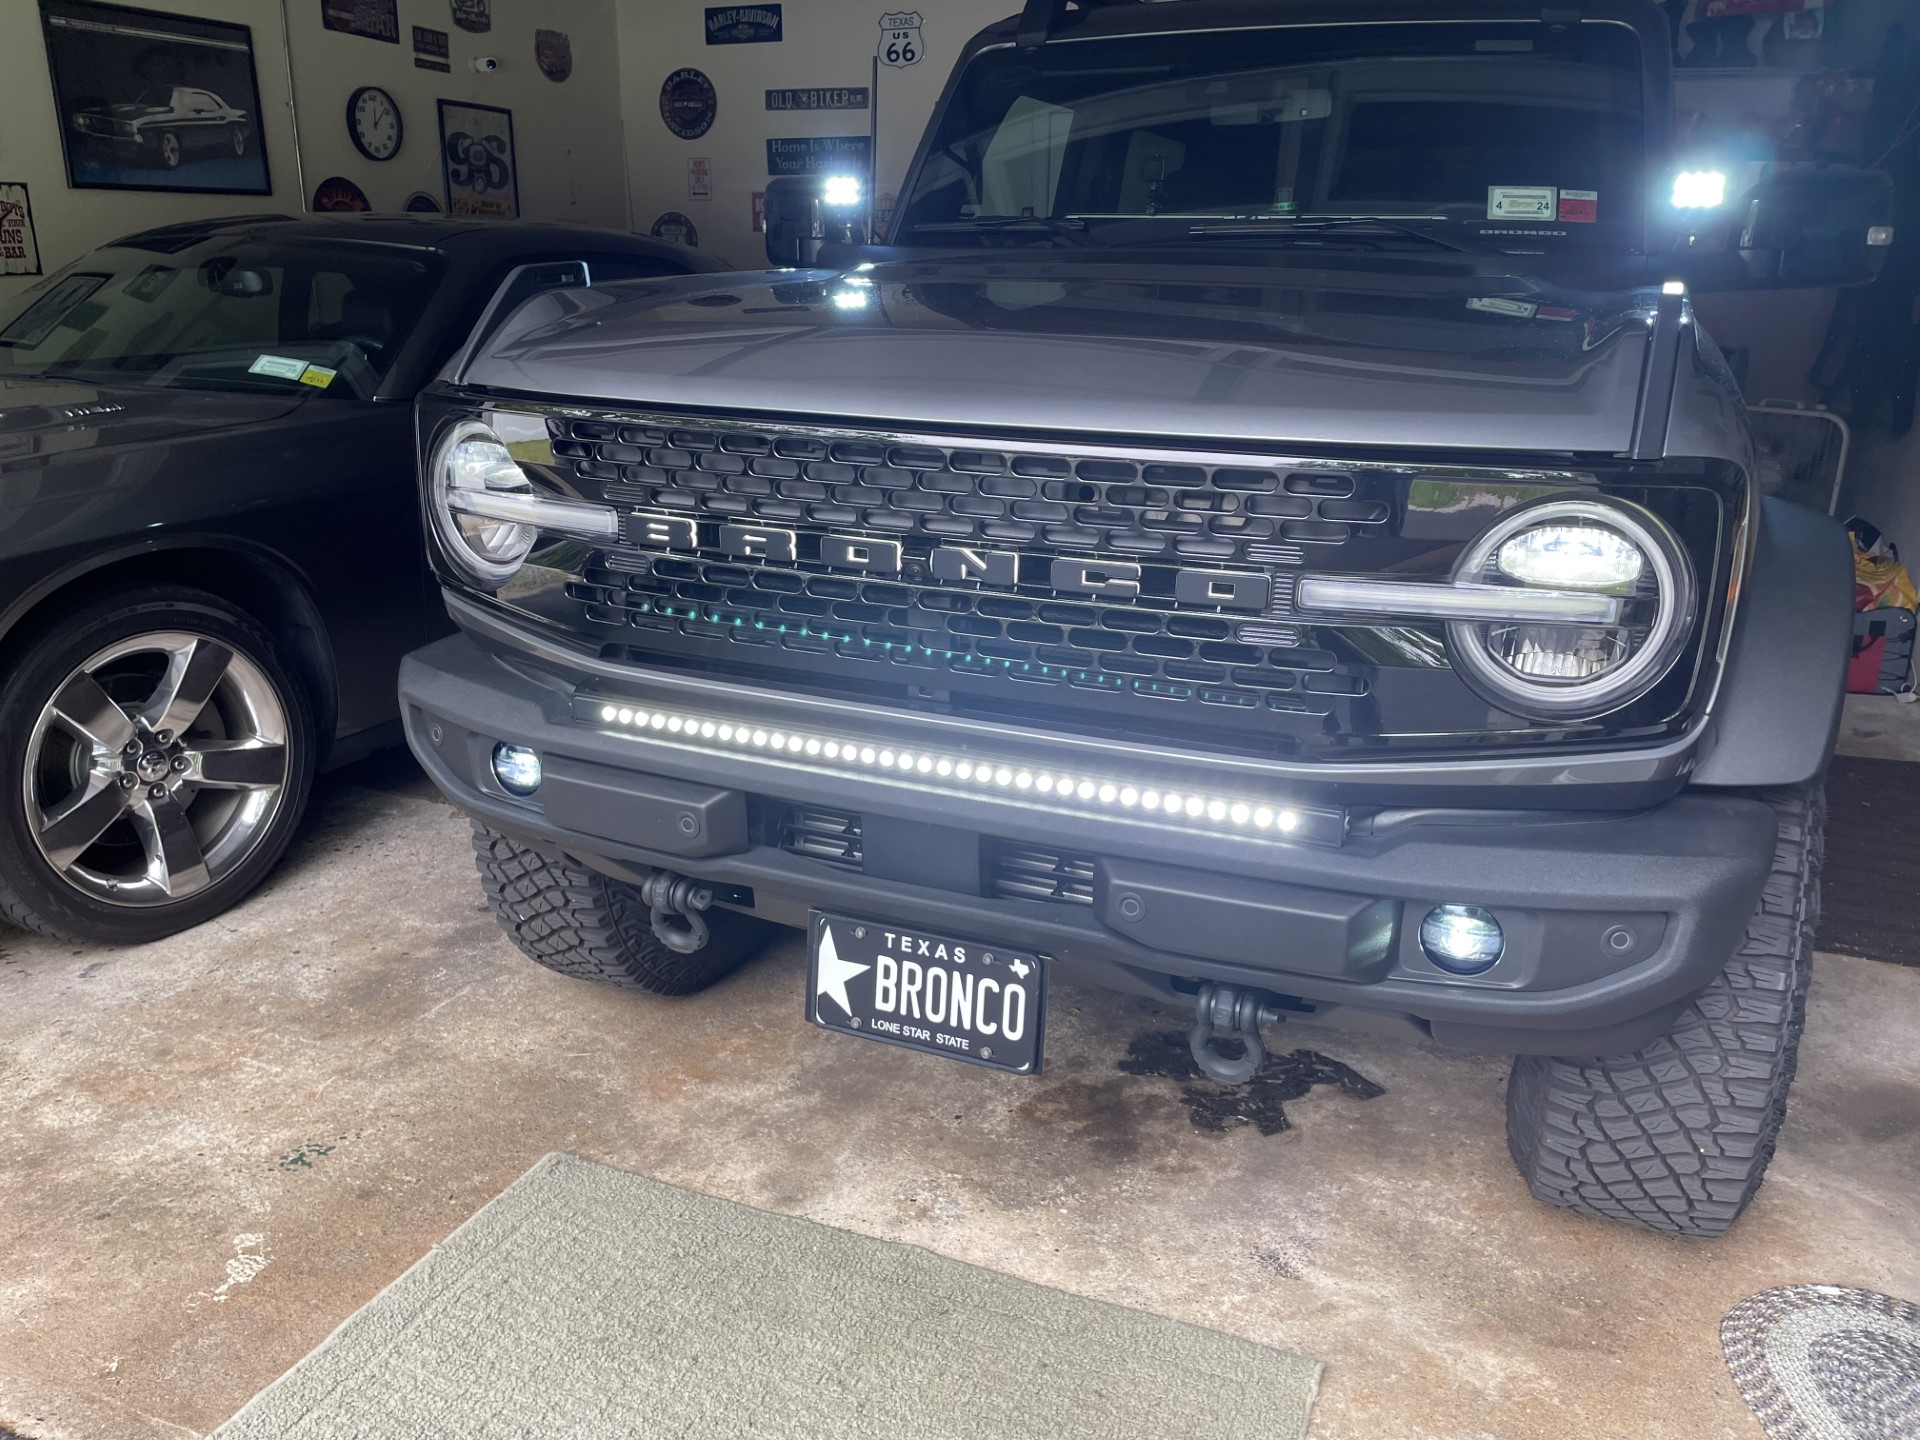 Ford Bronco Blacked out headlights? Blue Lights On